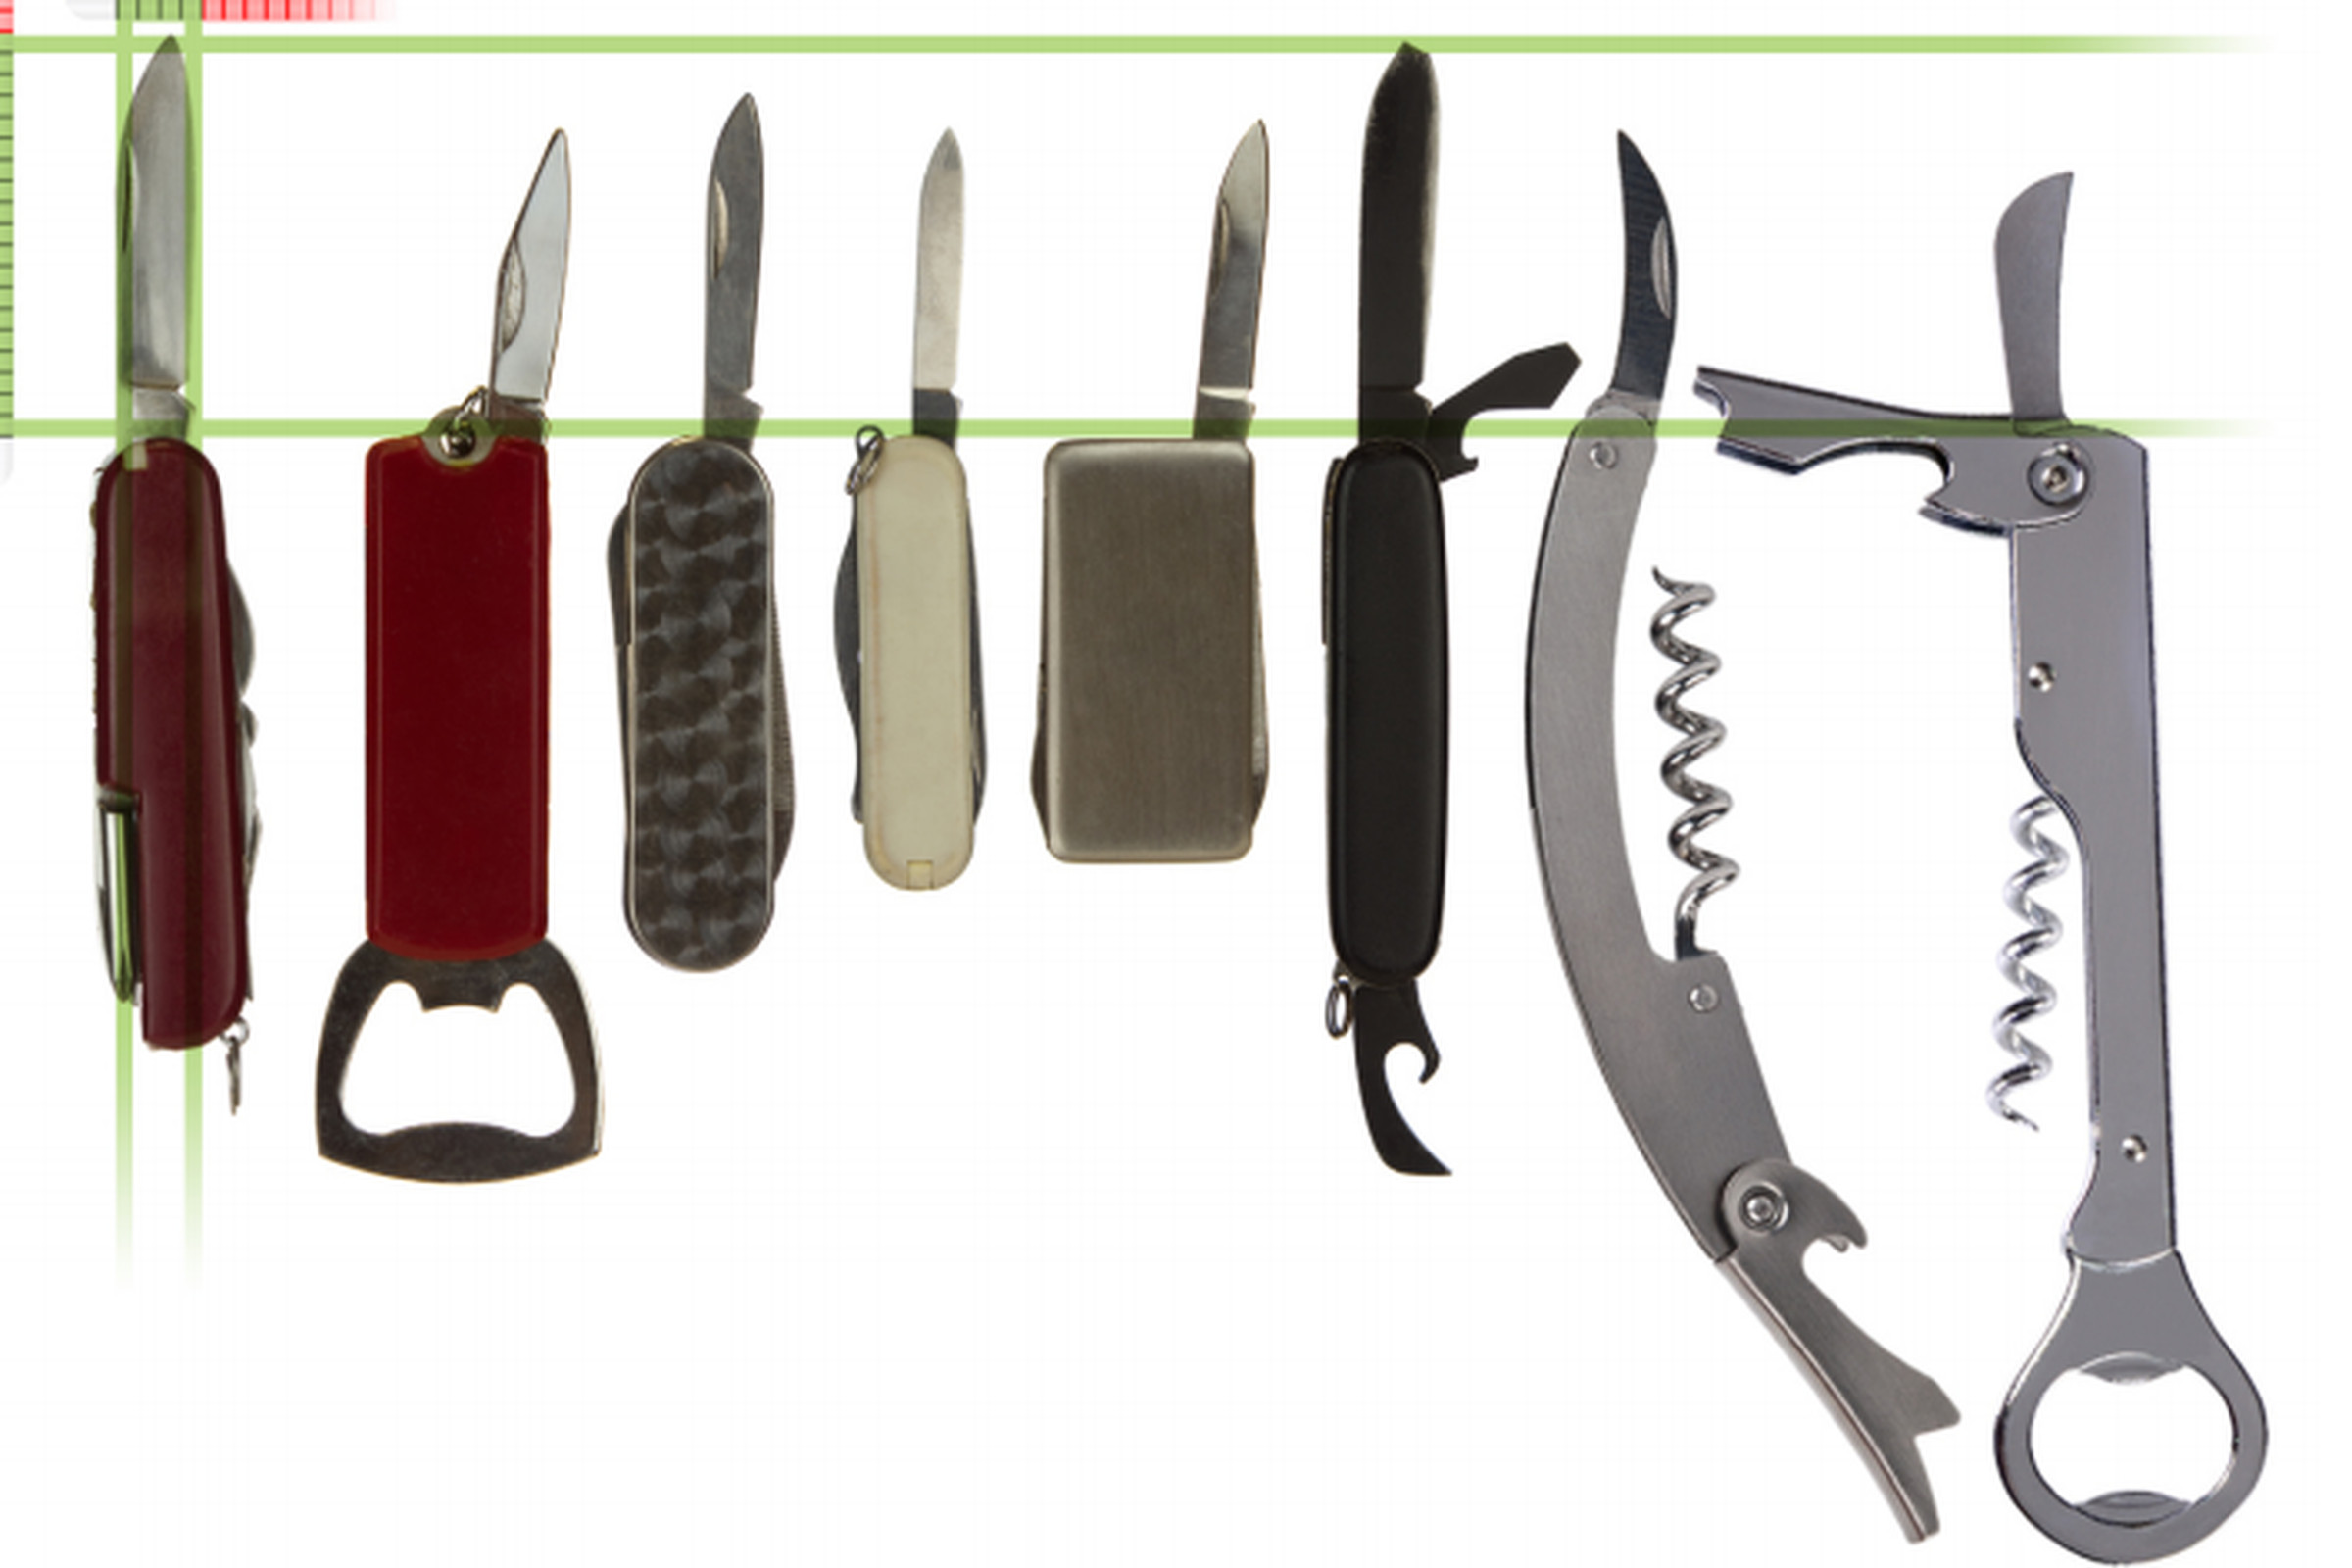 TSA-approved knives for carry on